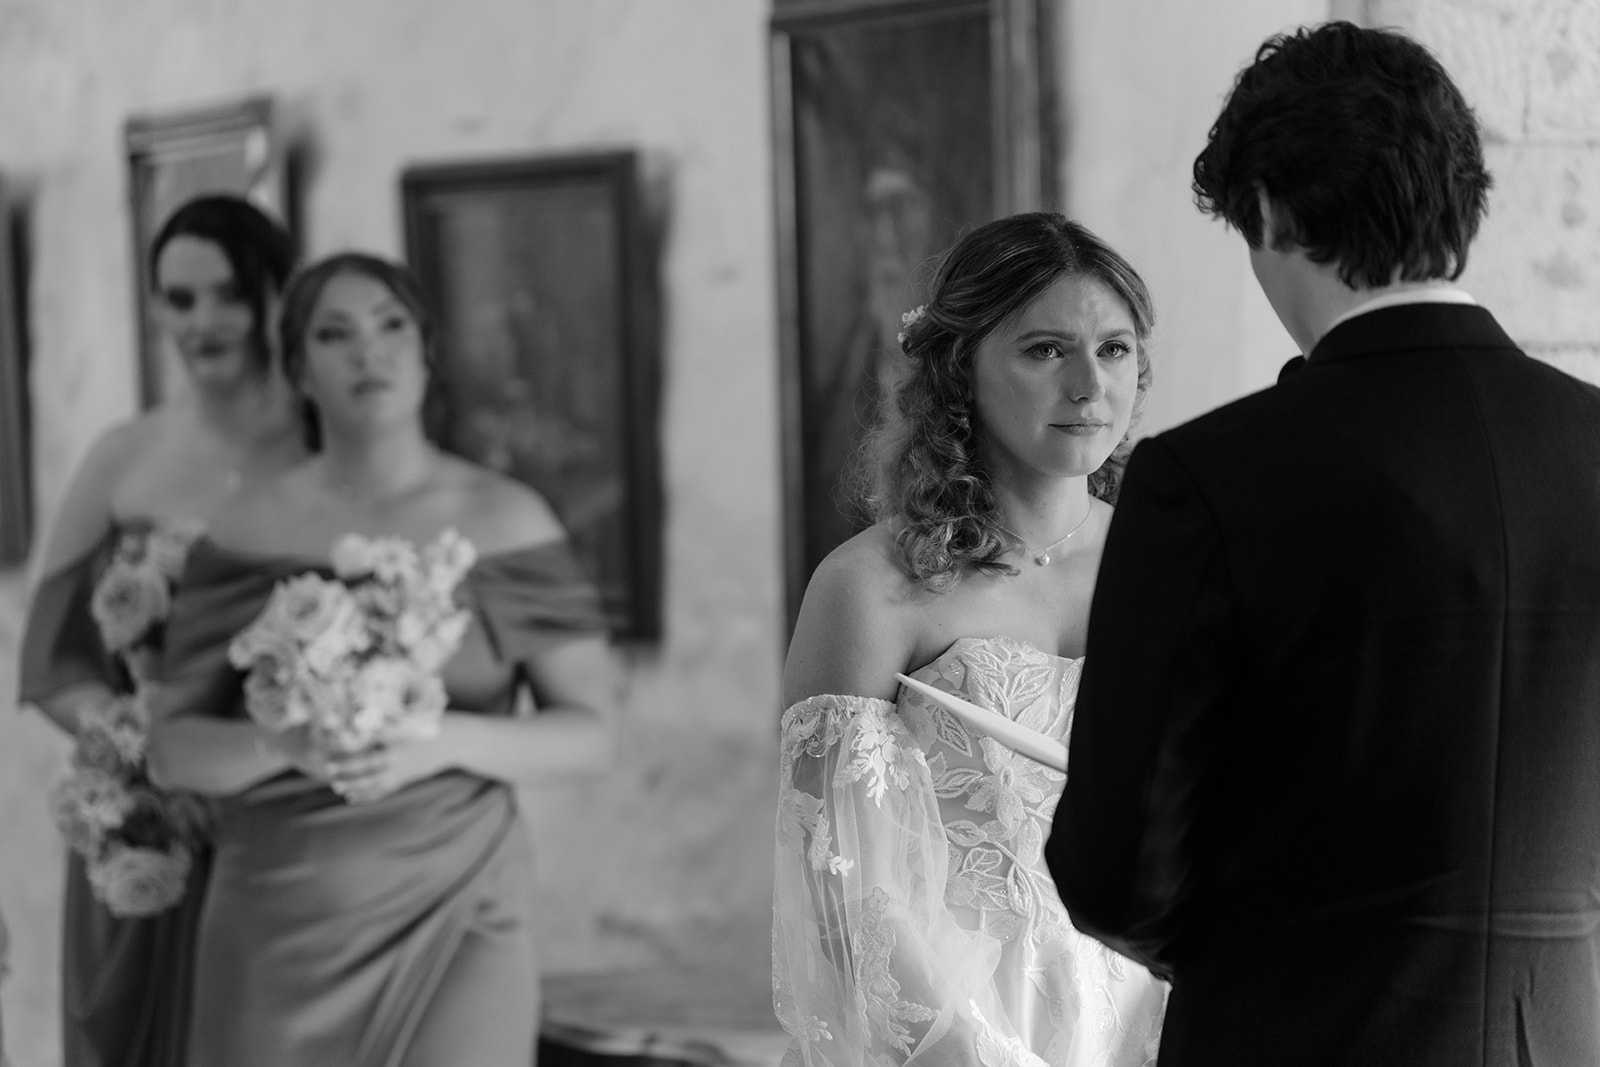 Emotional wedding vows at Montsalvat - Bride's tearful reaction